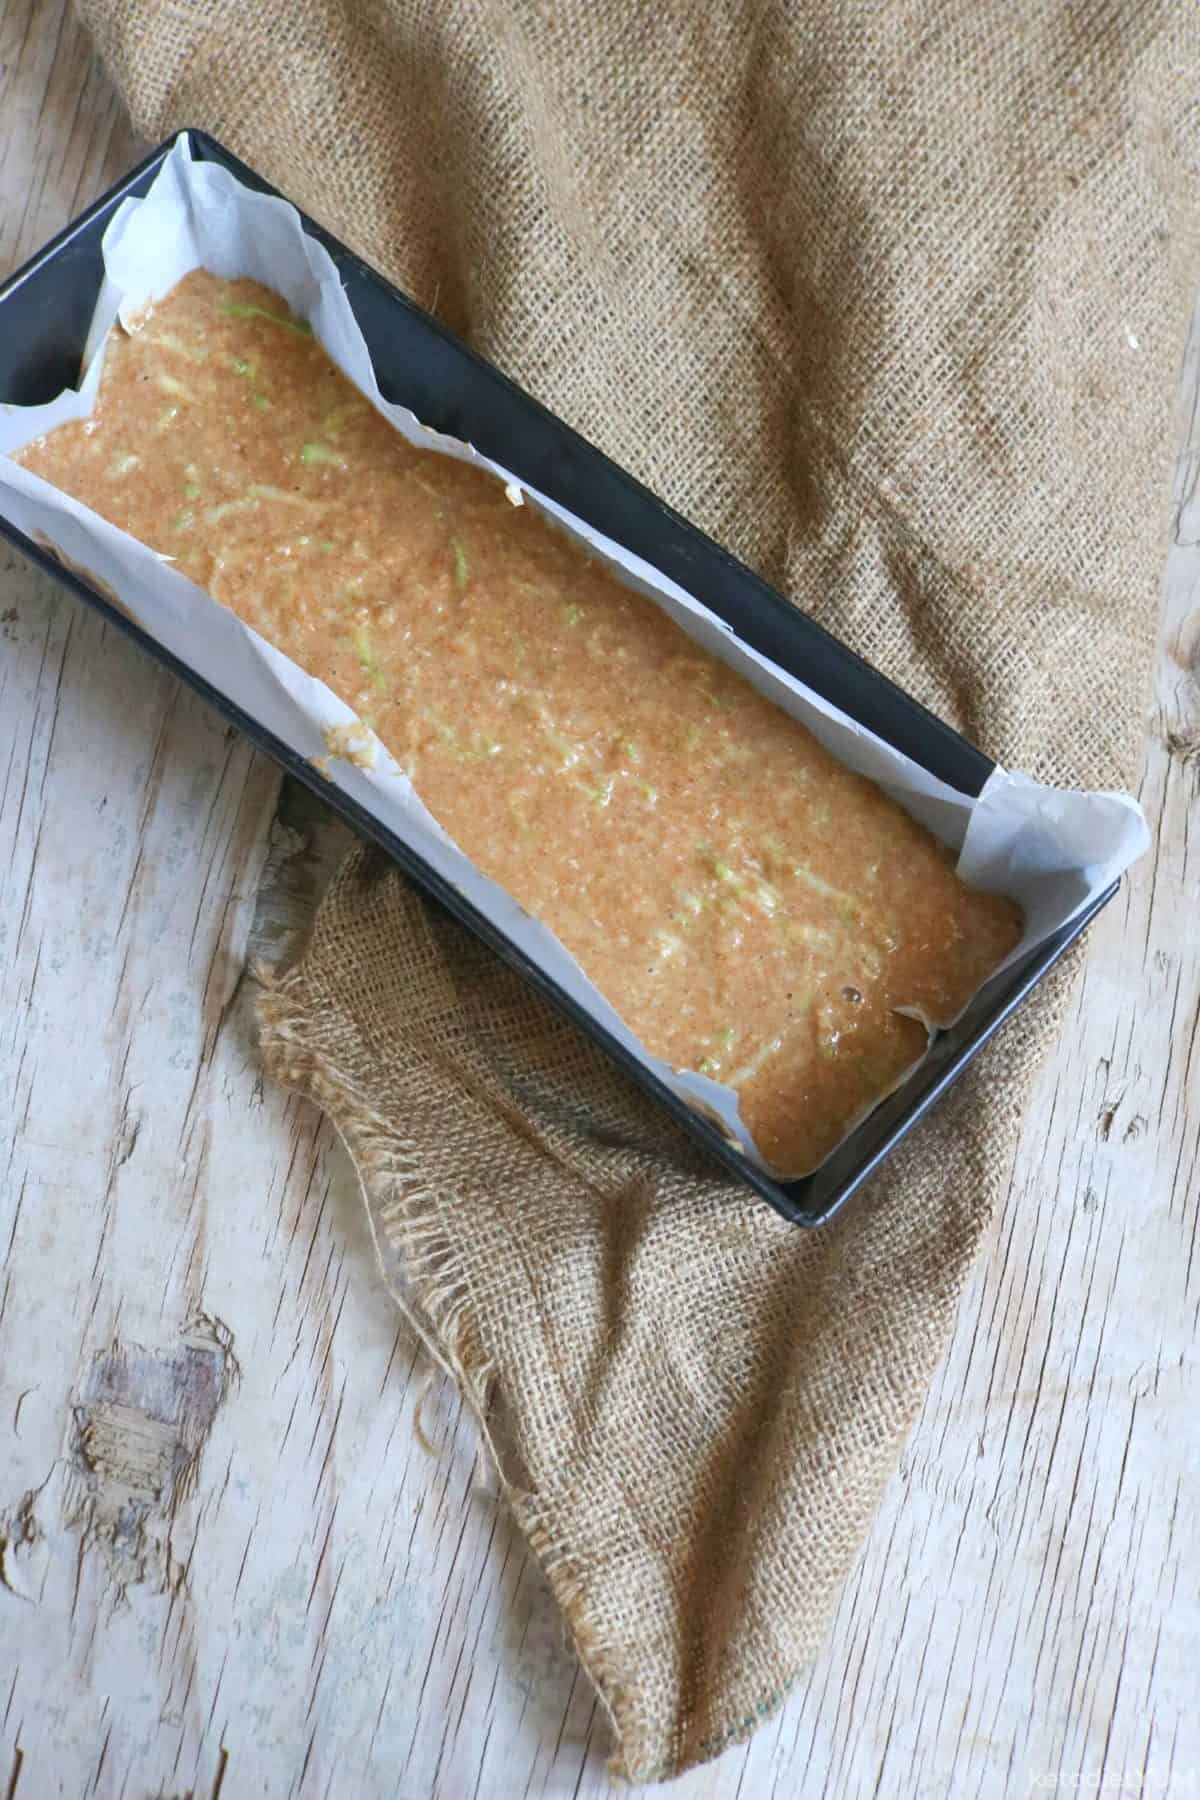 Zucchini bread batter poured into a lined loaf pan and ready to bake